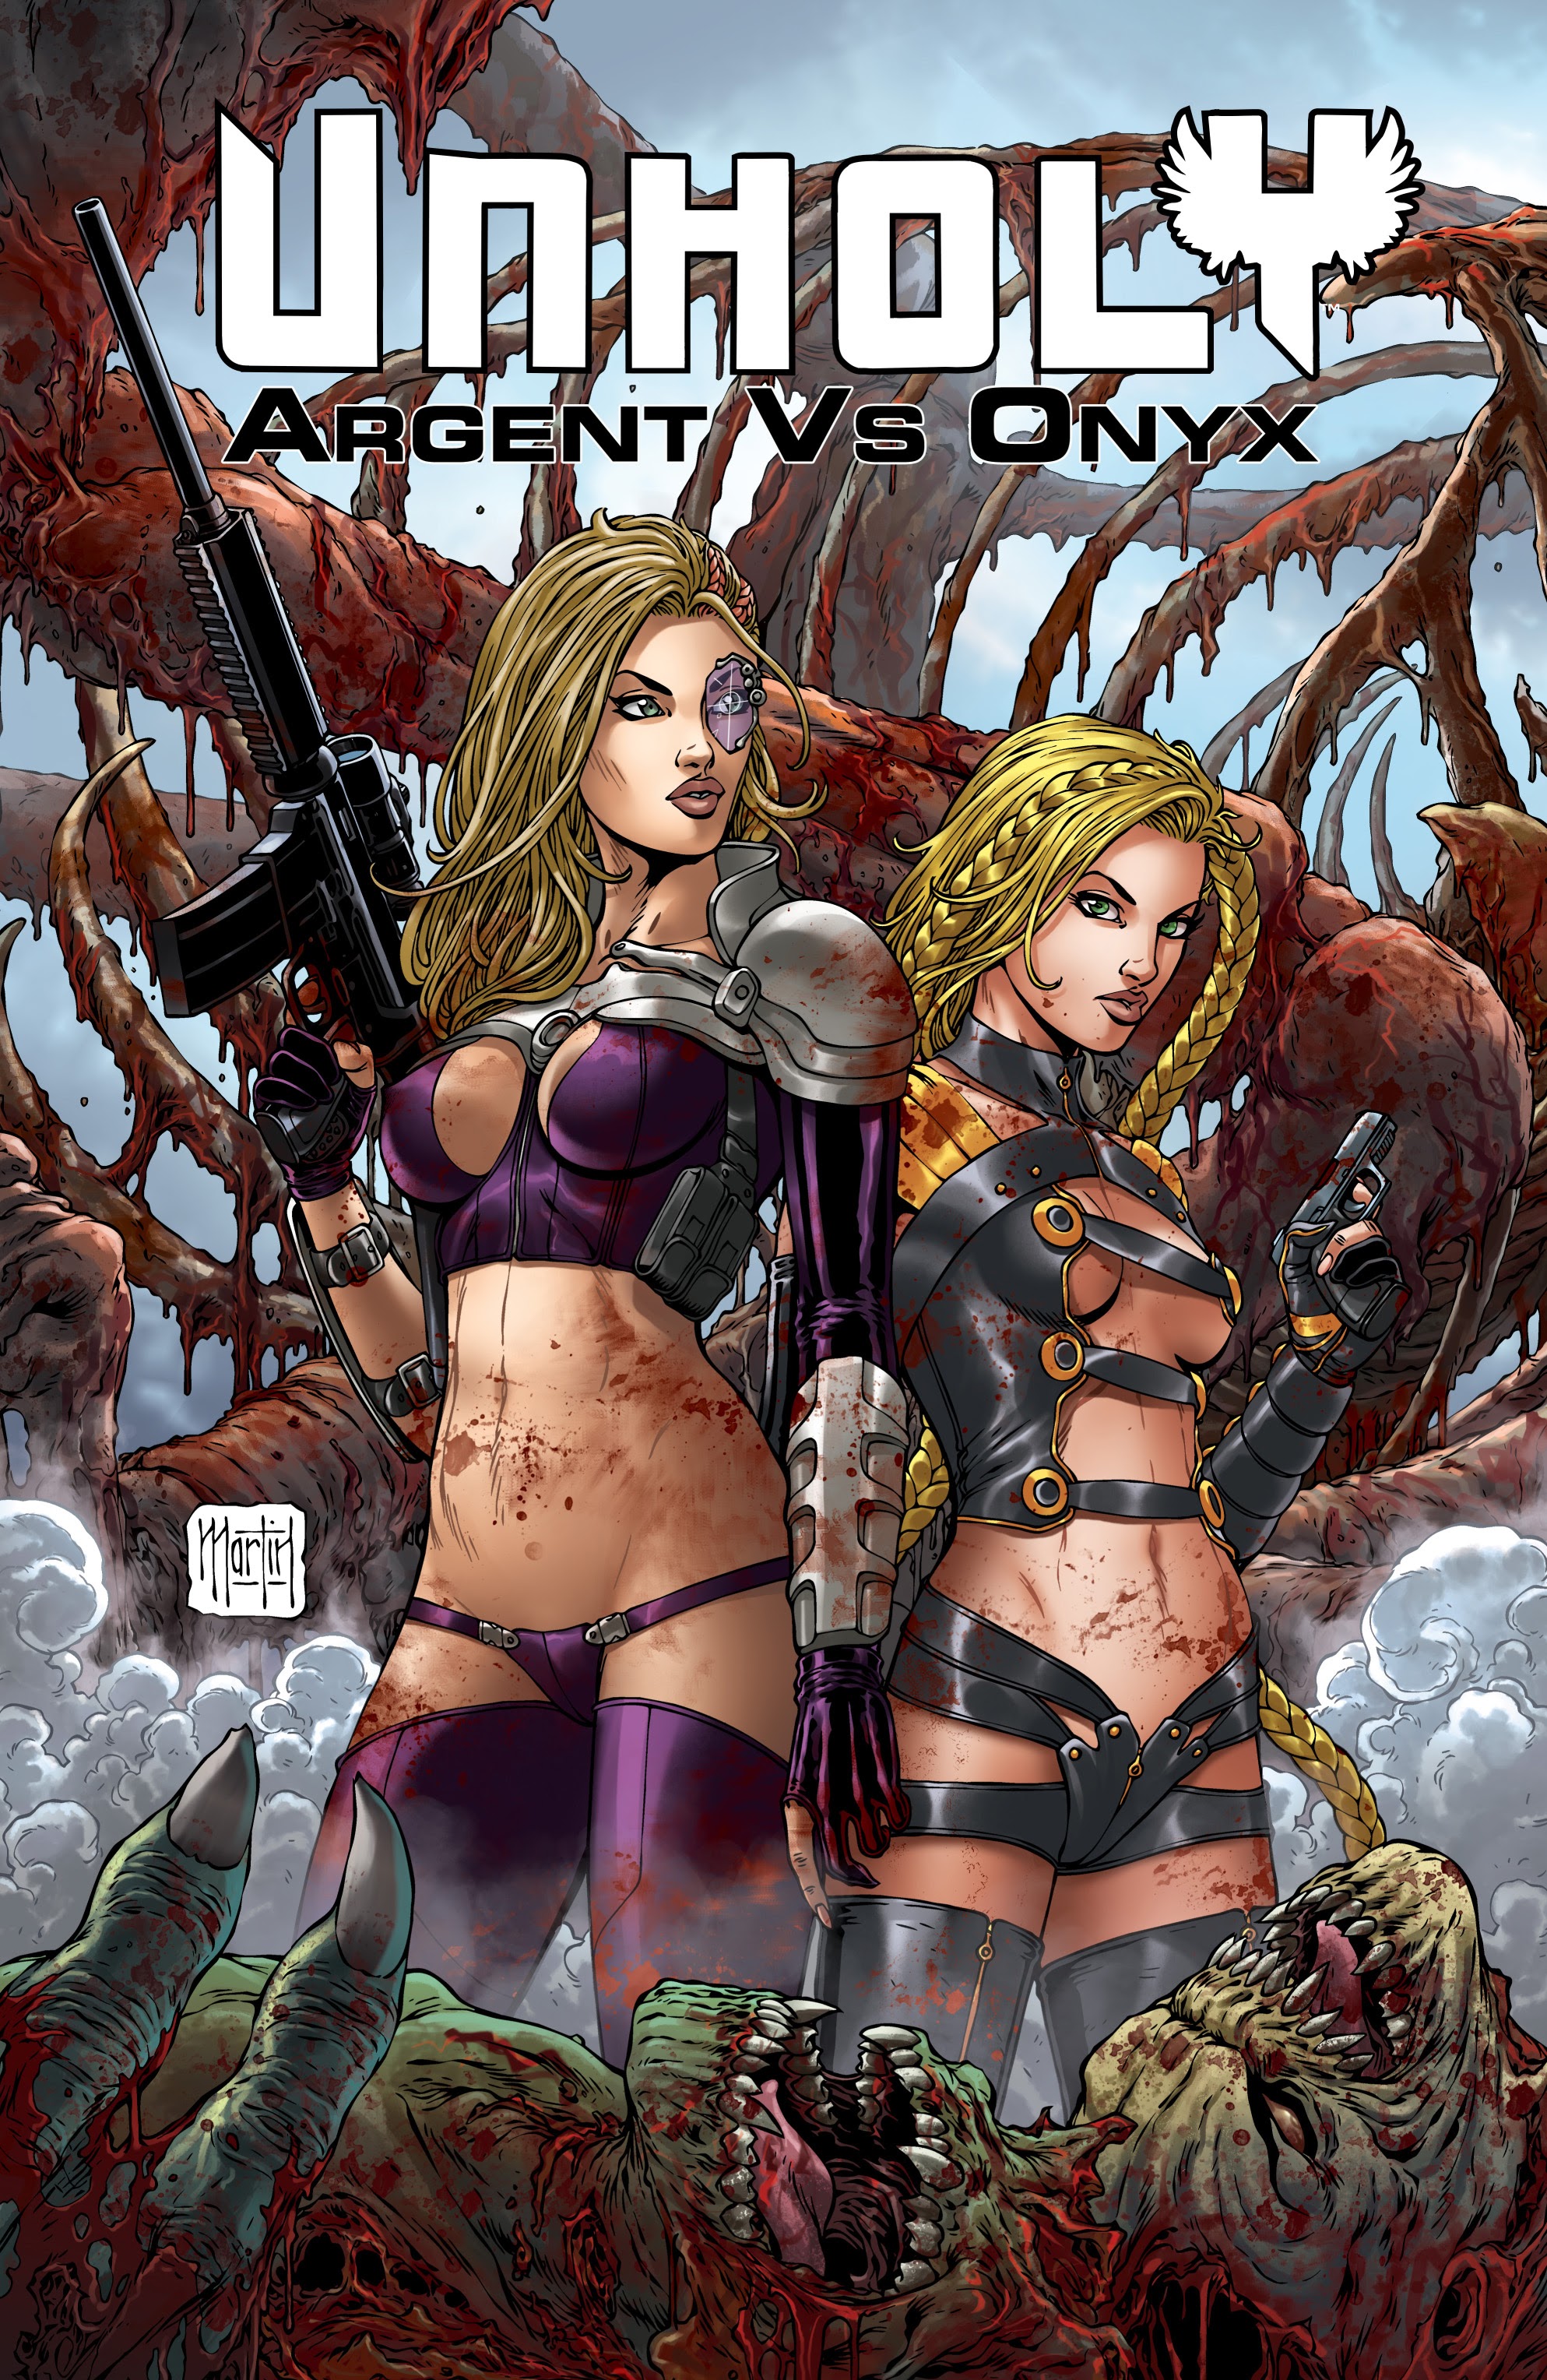 Read online Unholy: Argent vs Onyx comic -  Issue #0 - 3